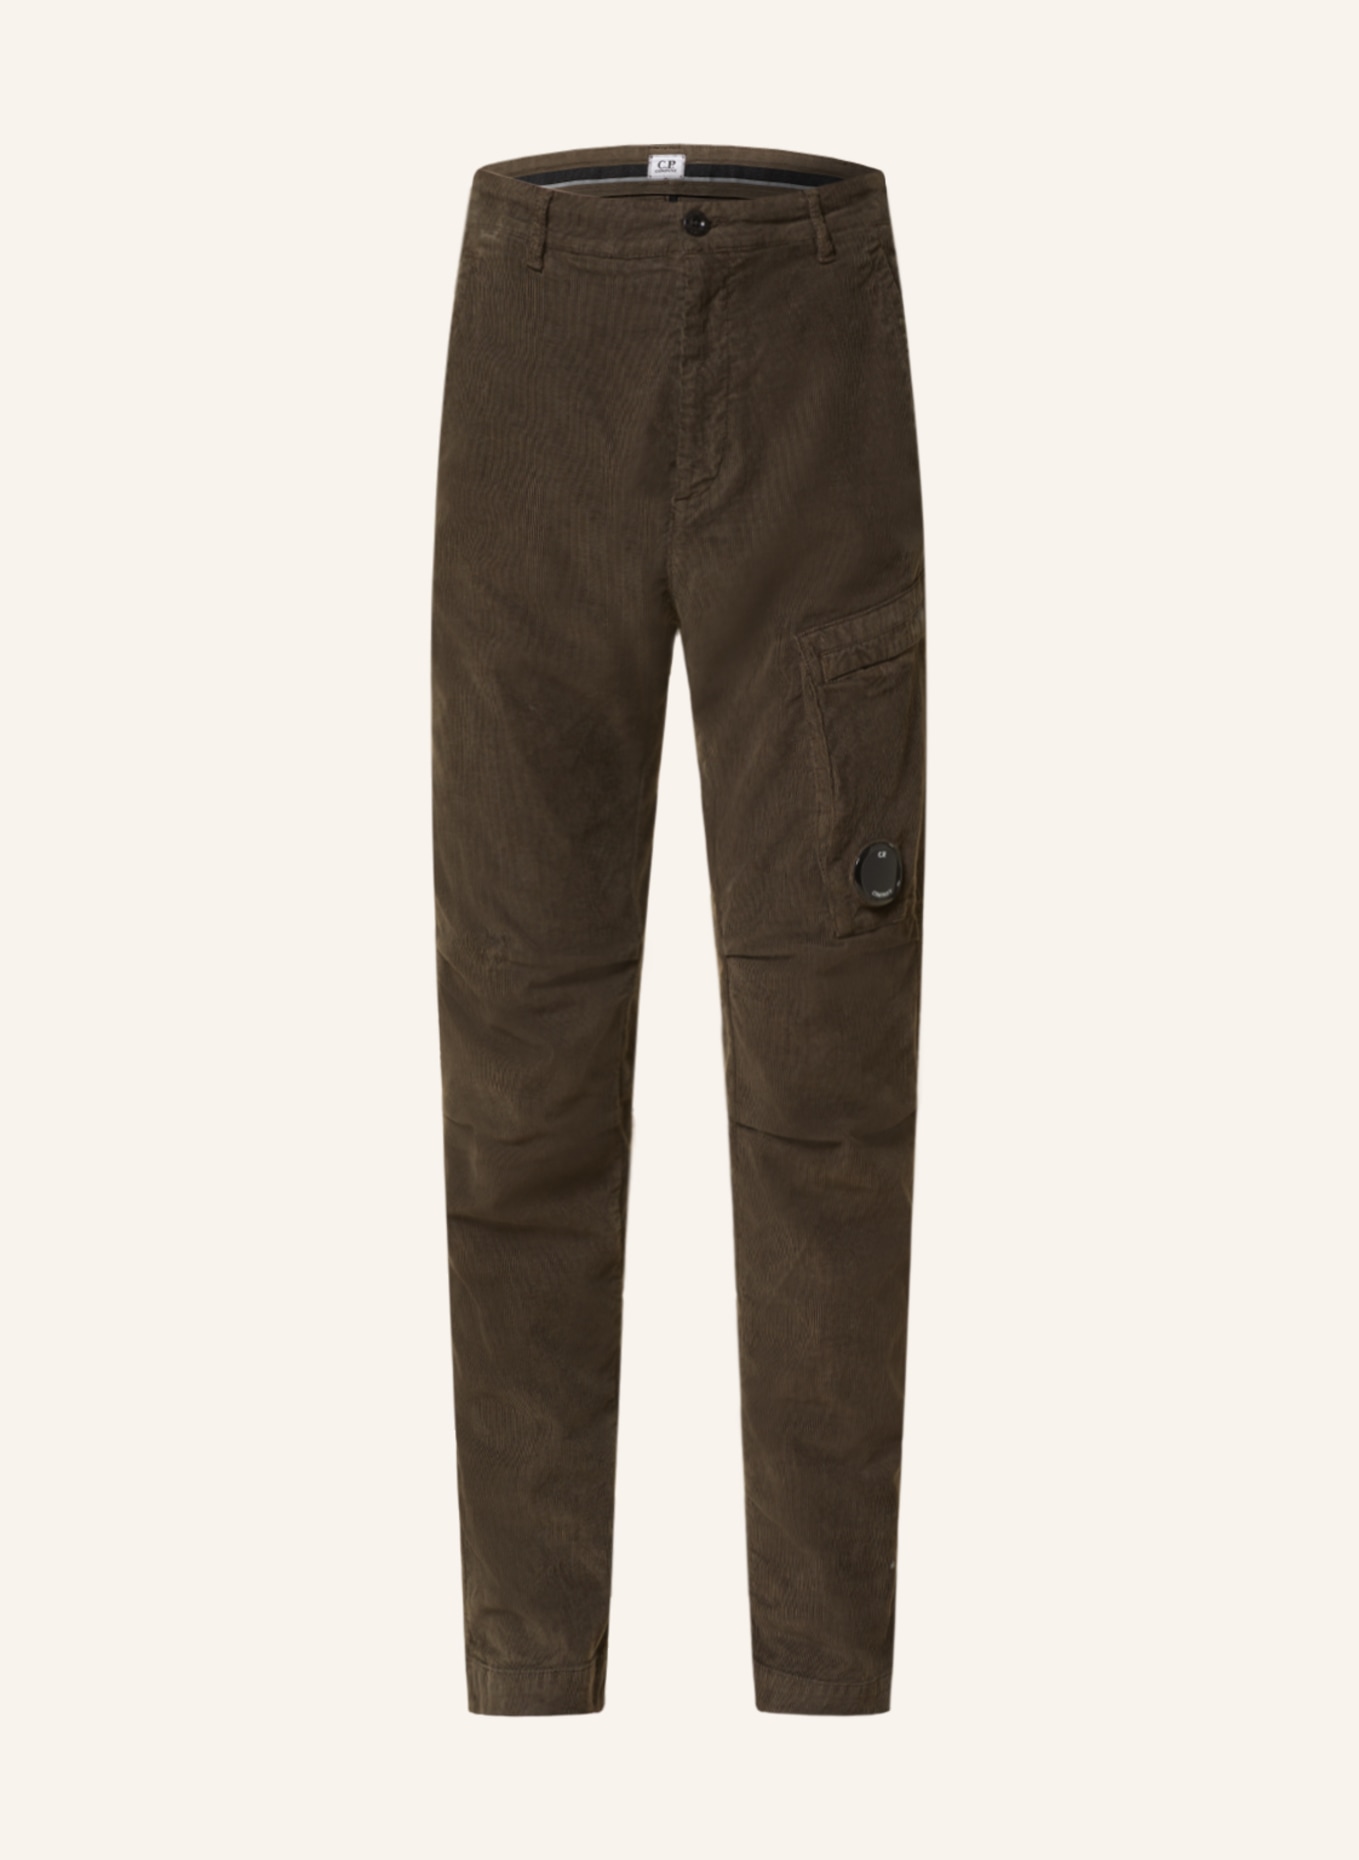 C.P. COMPANY Cargo pants regular fit in corduroy, Color: OLIVE (Image 1)